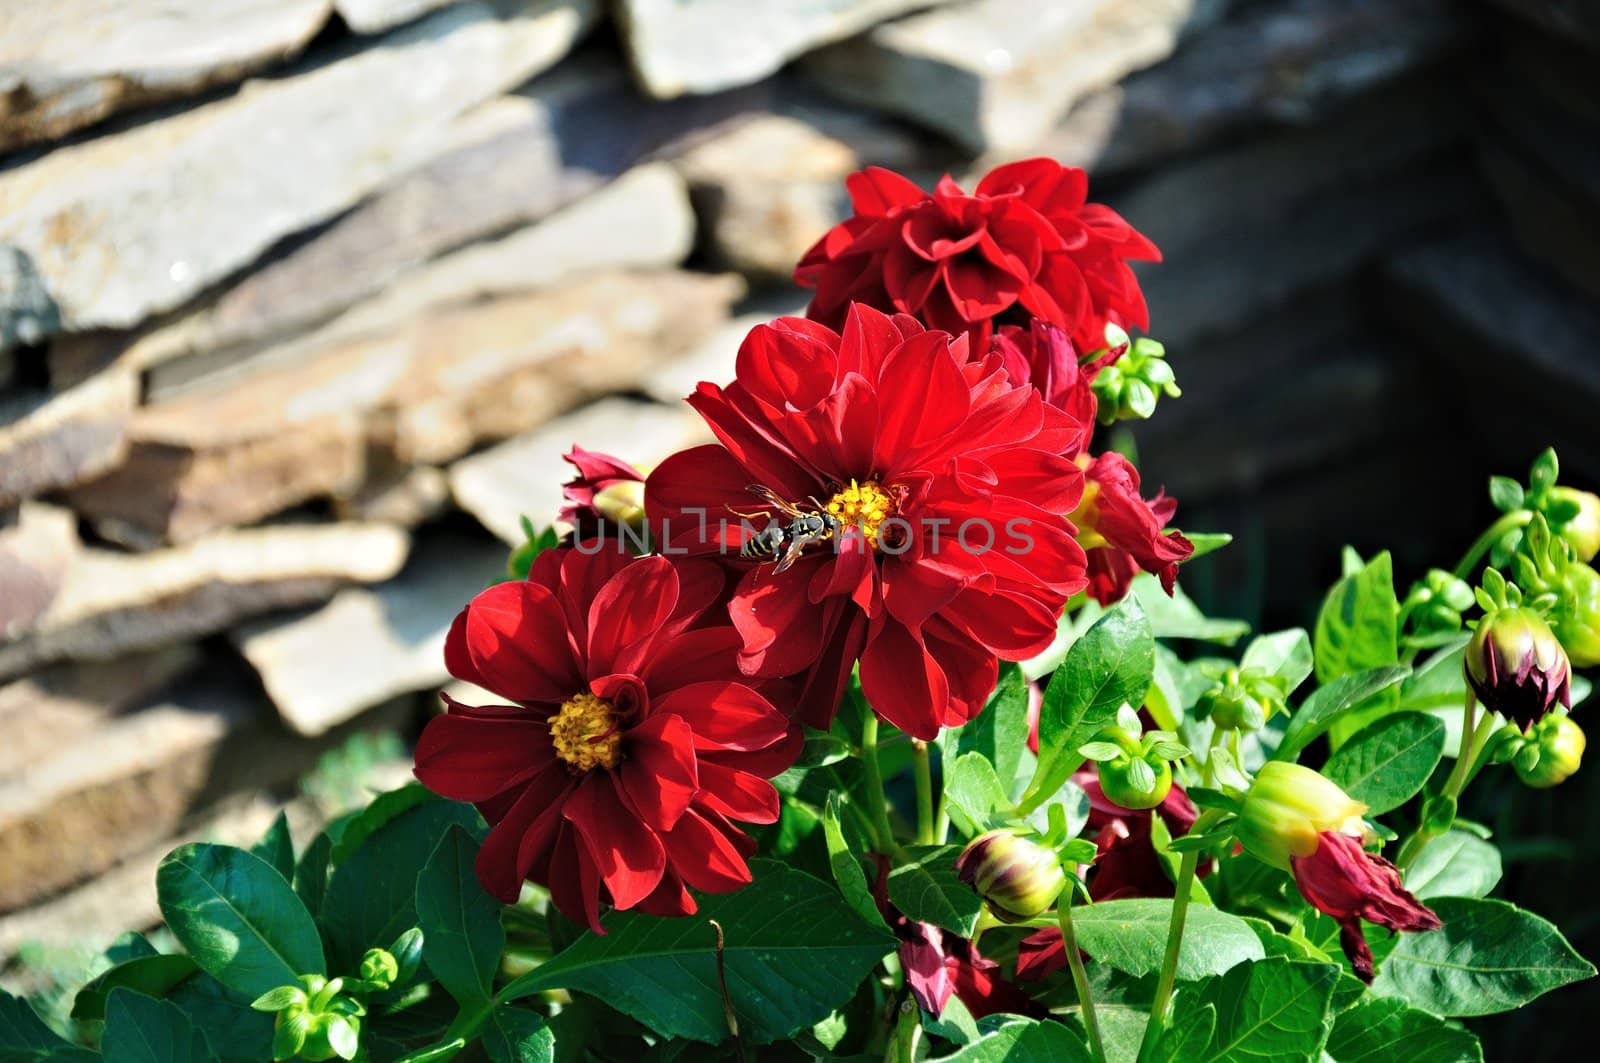 huge wasp on a red flower, close-up